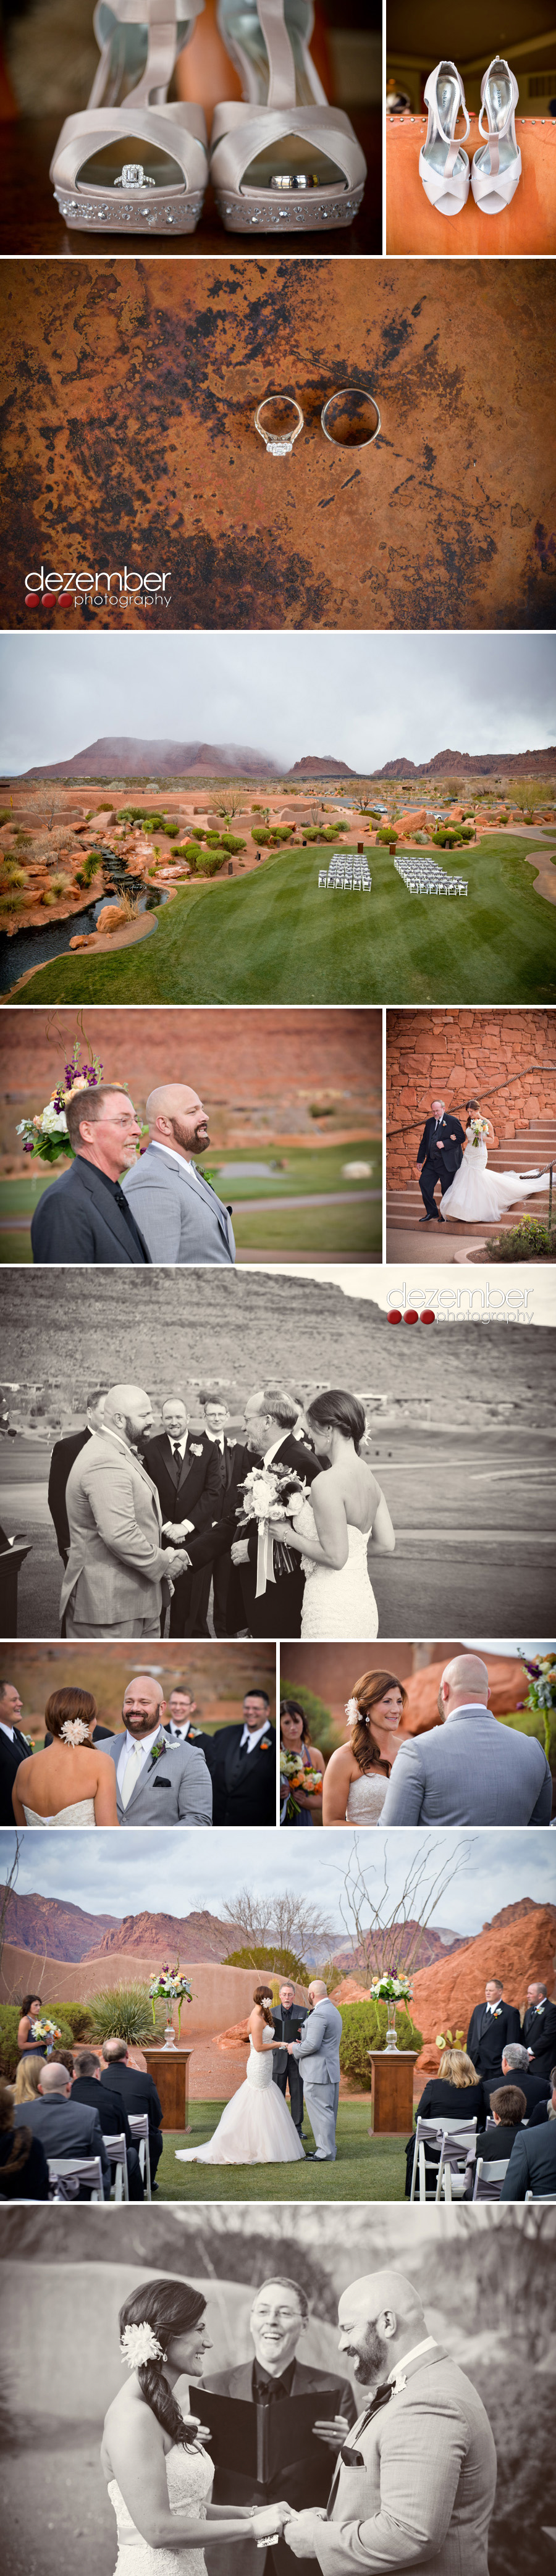 Affordable but good wedding photographers